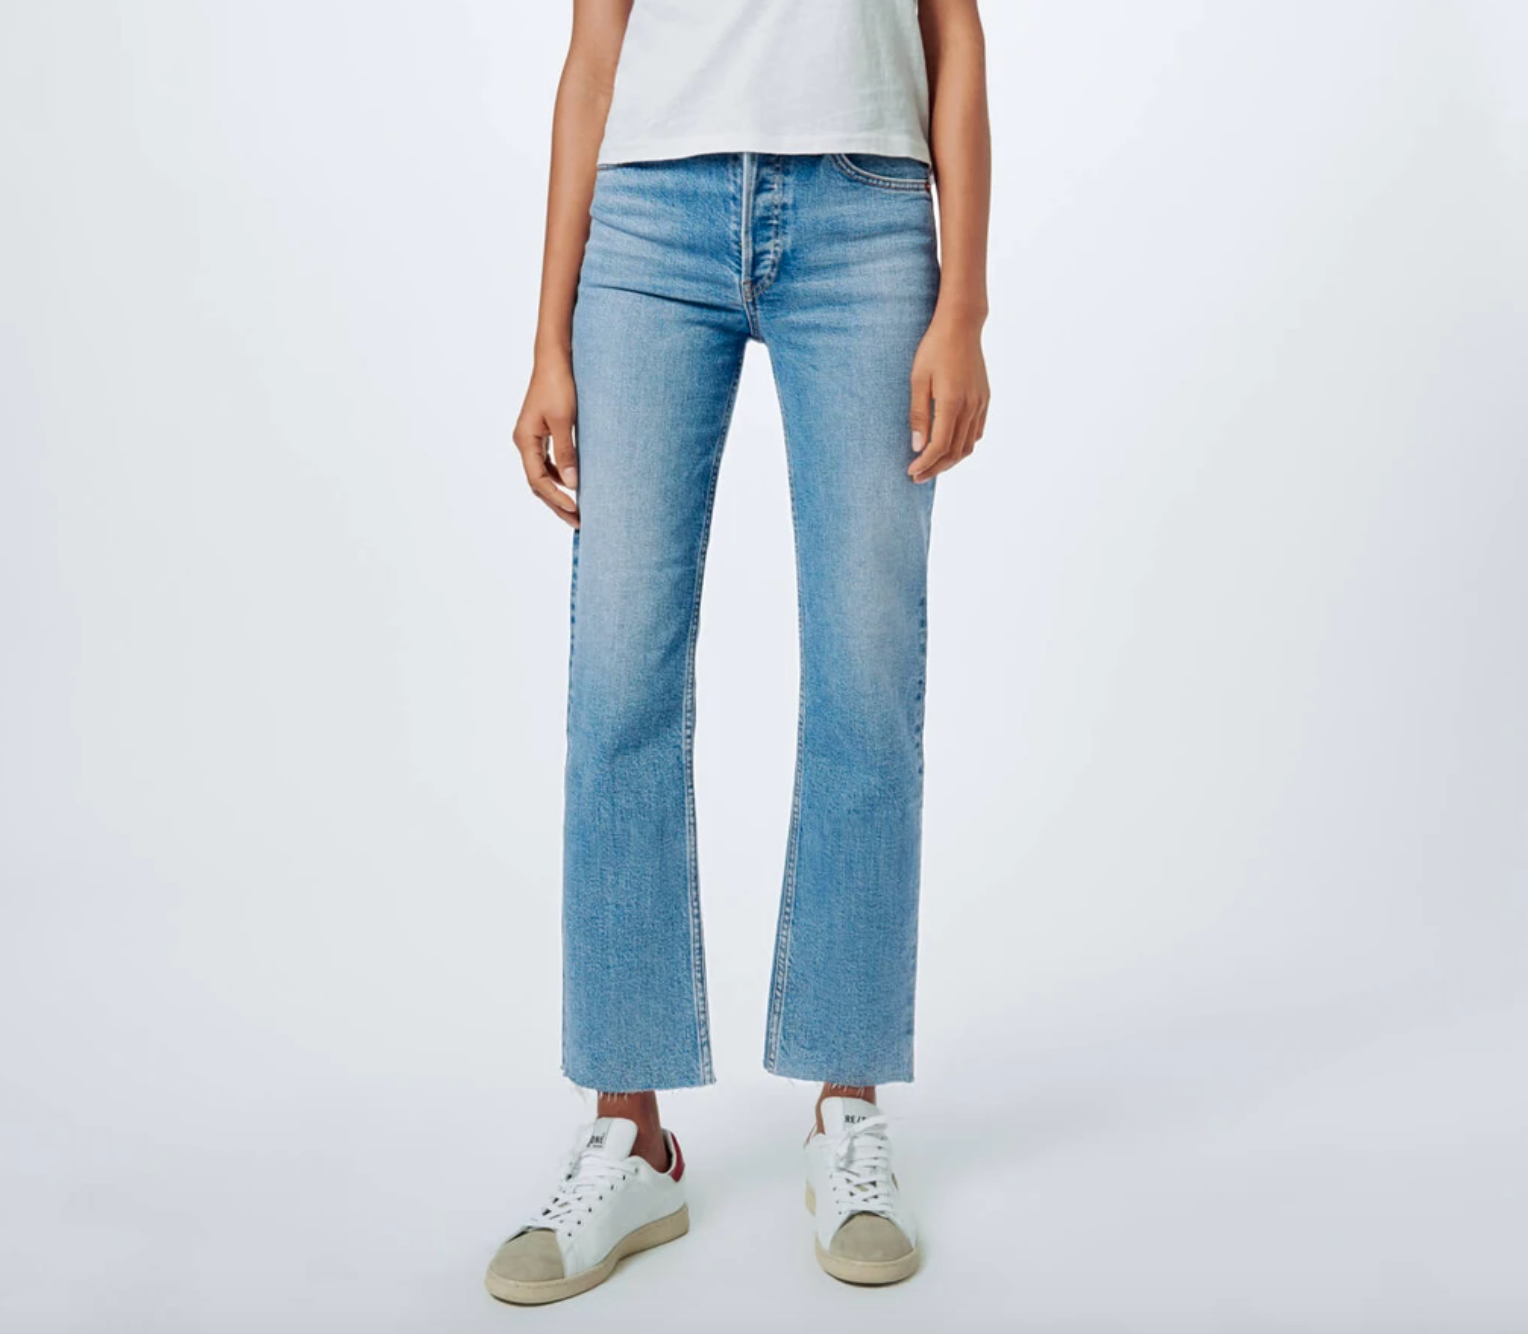 Levis REDONE jeans frayed cropped